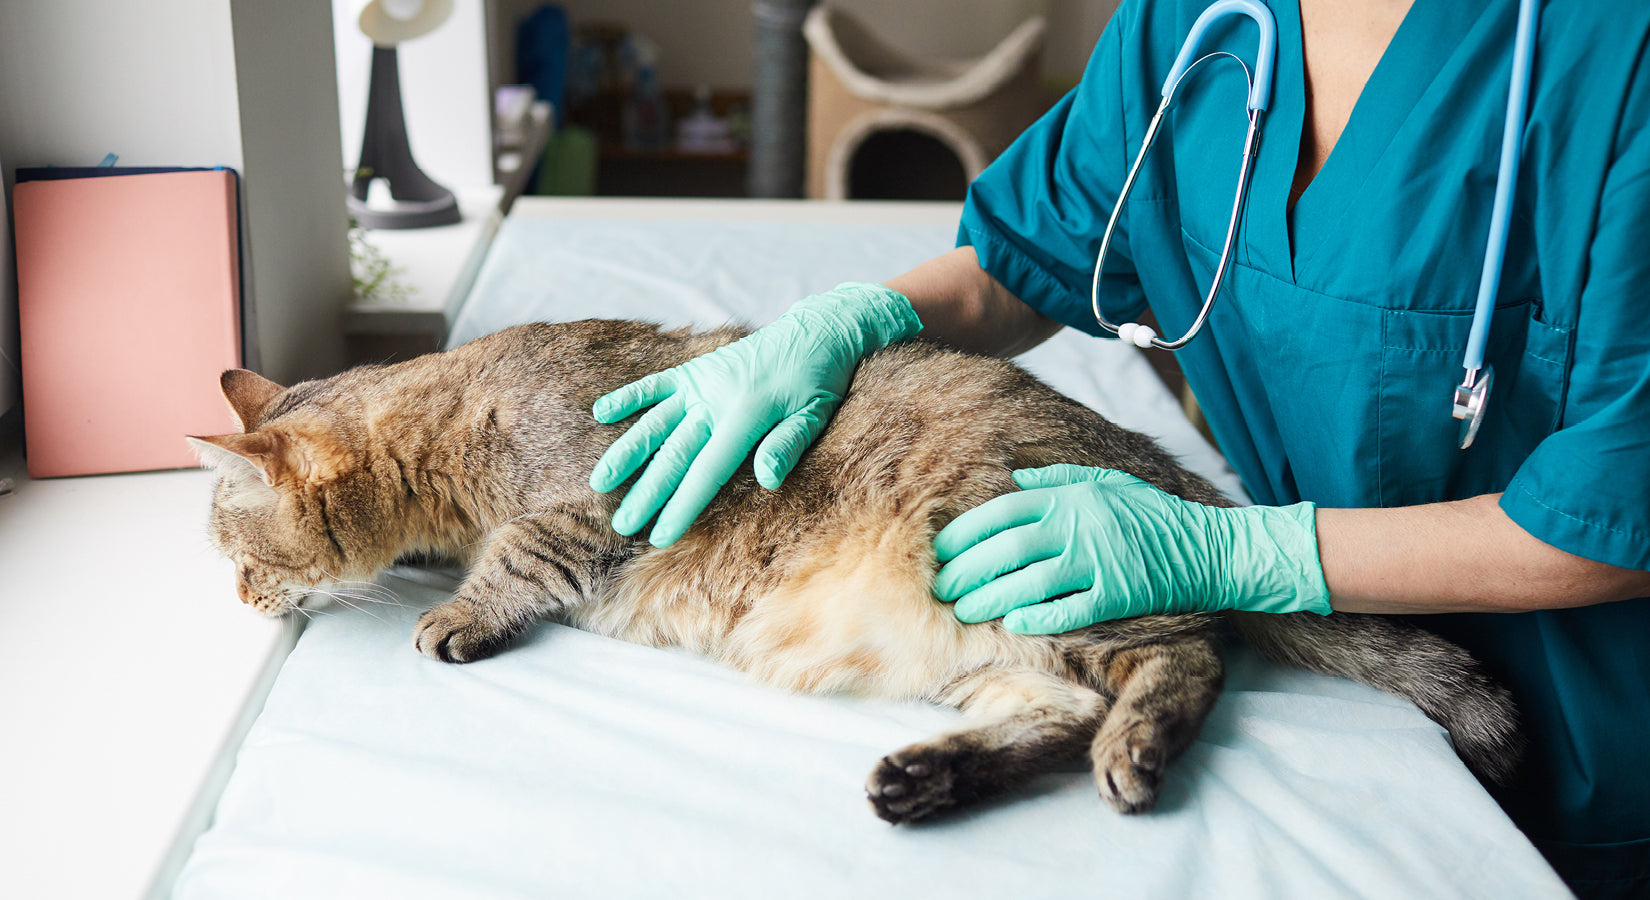 Microchipping cats is set to become compulsory – here’s what you need to know